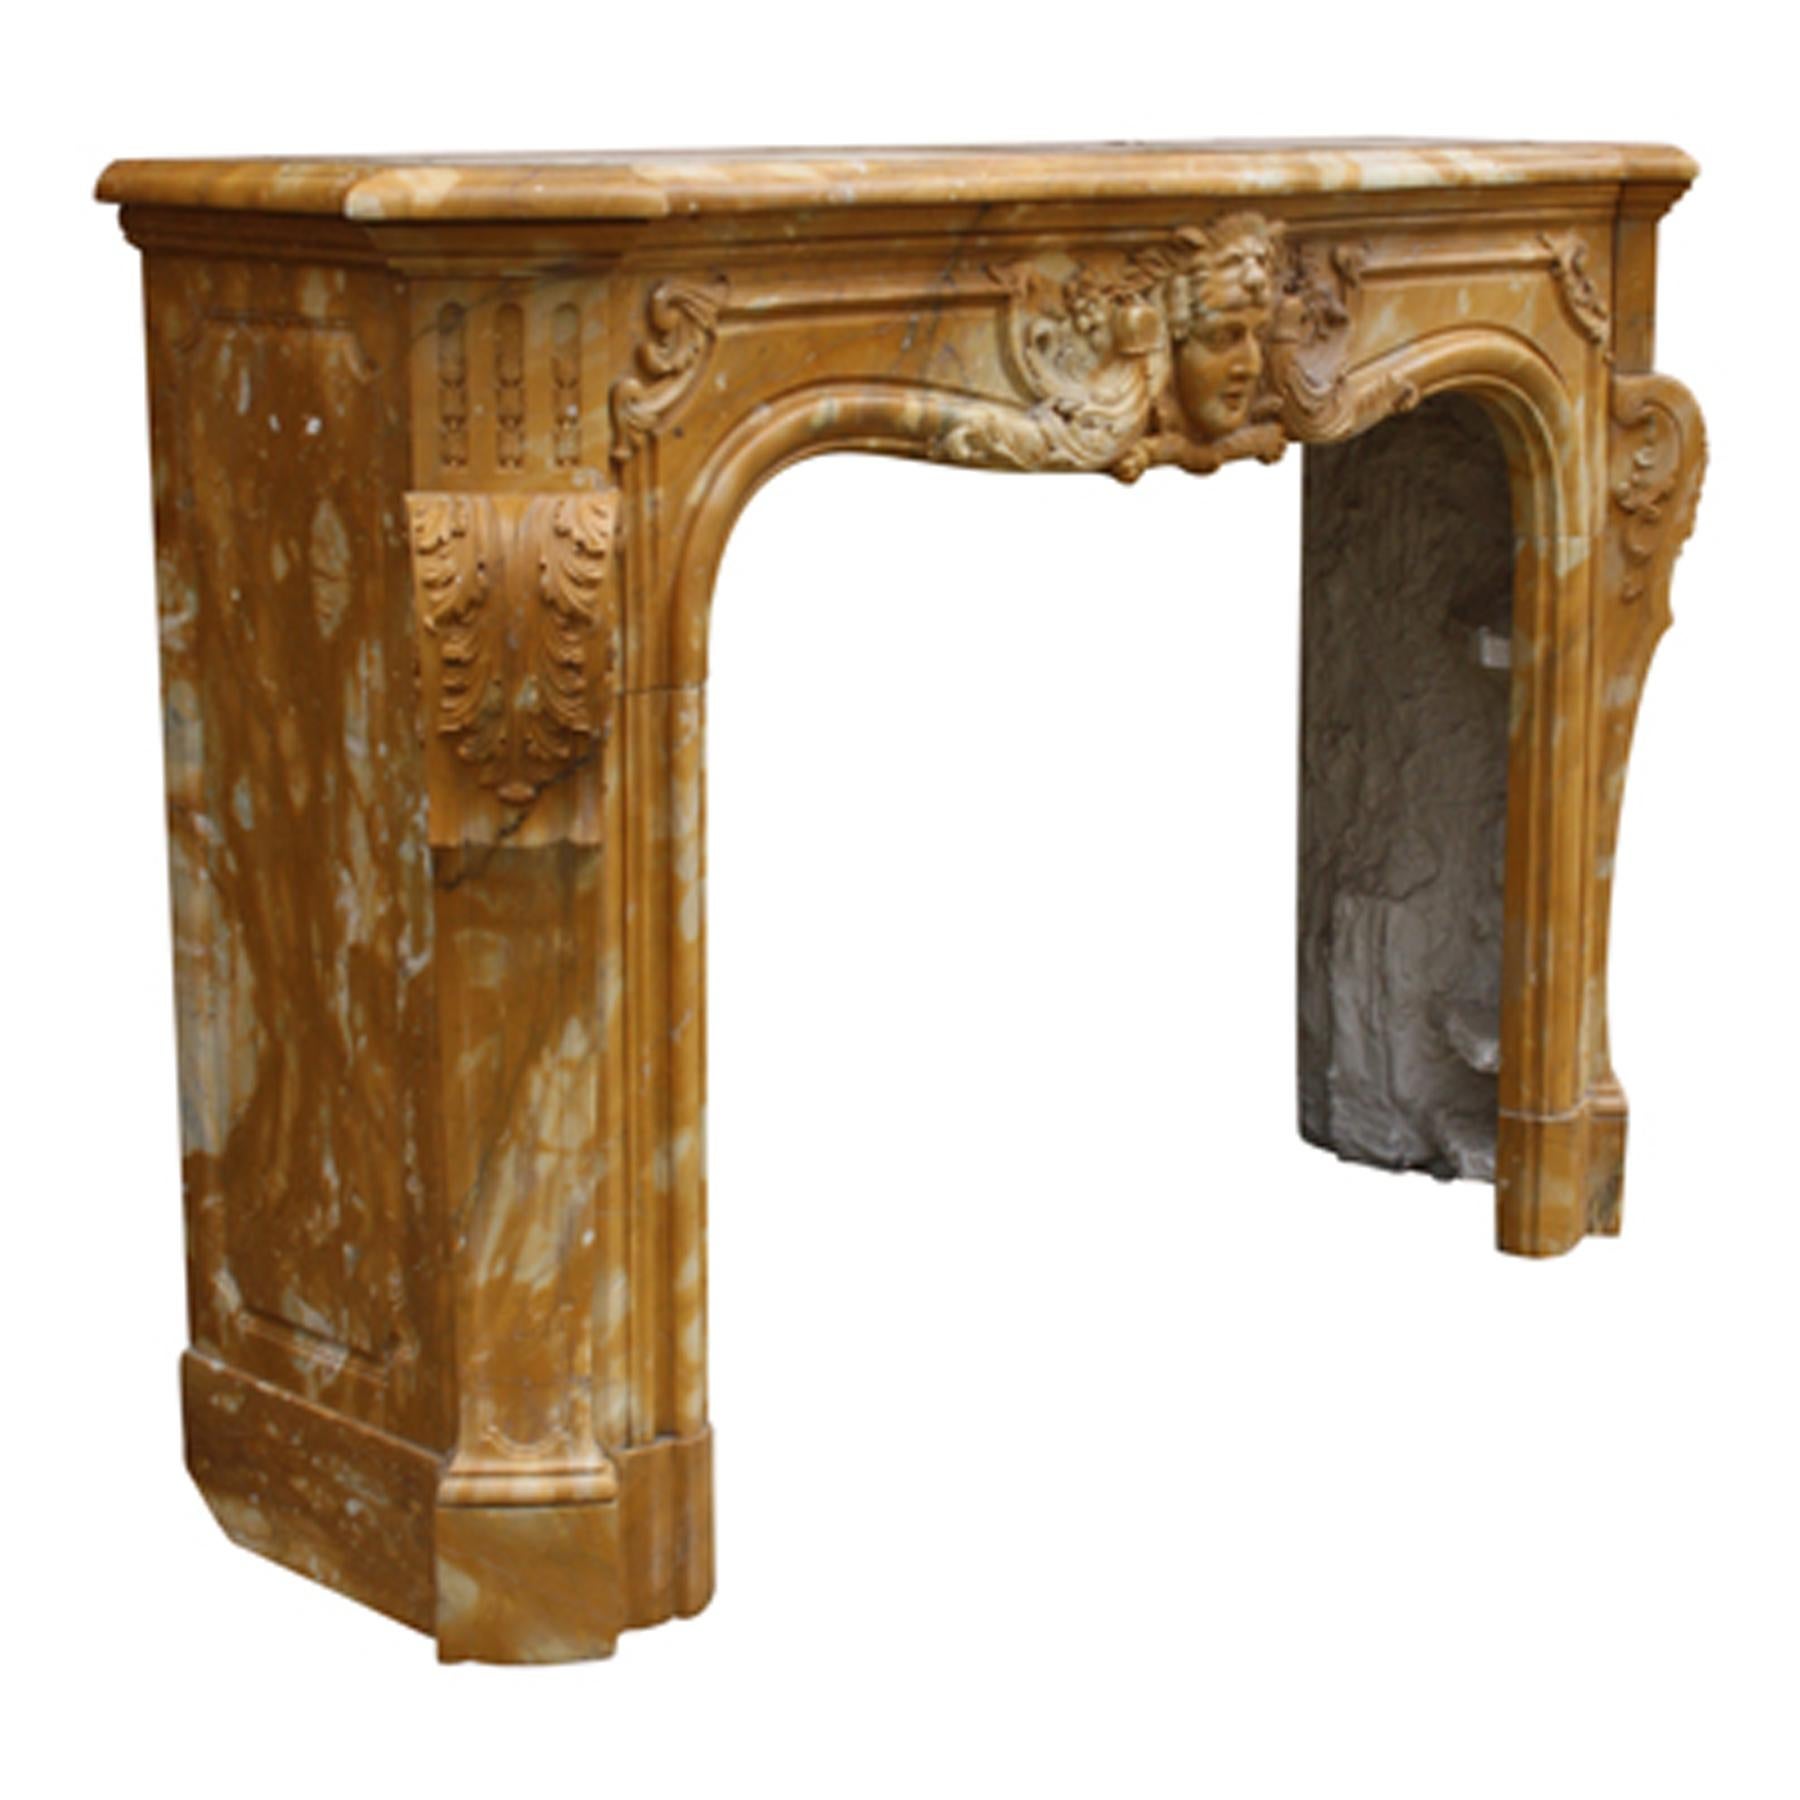 A mid-20th century French Chimneypiece composed of pale Siena marble in the Louis XV manner. The jambs formed of elongated acanthus consoles below triglyph corner blocks above. The serpentine panelled frieze has a central classical mask with a lion